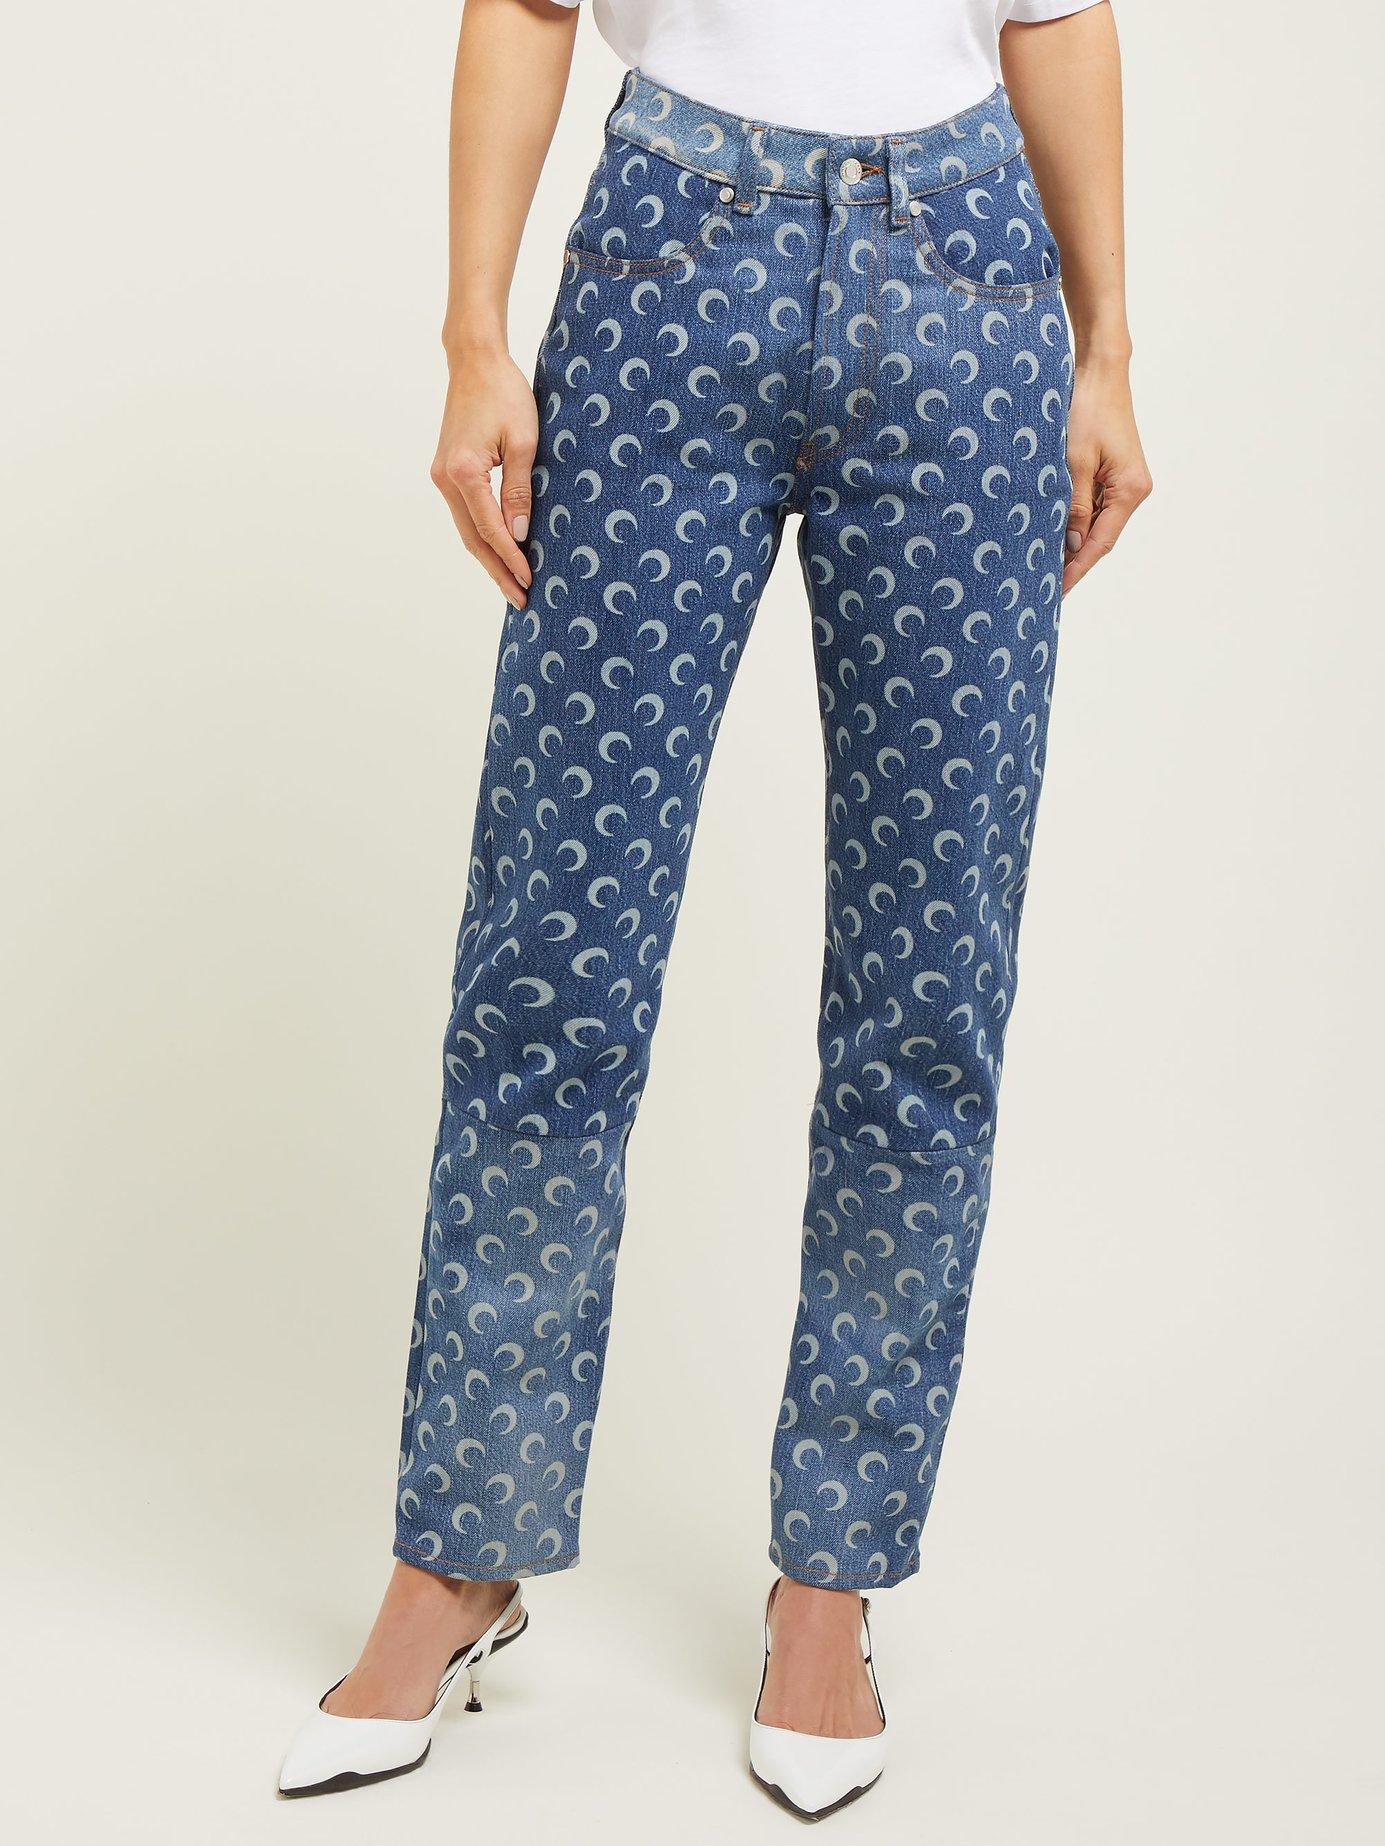 Marine Serre Crescent Moon Patterned Jeans in Blue | Lyst